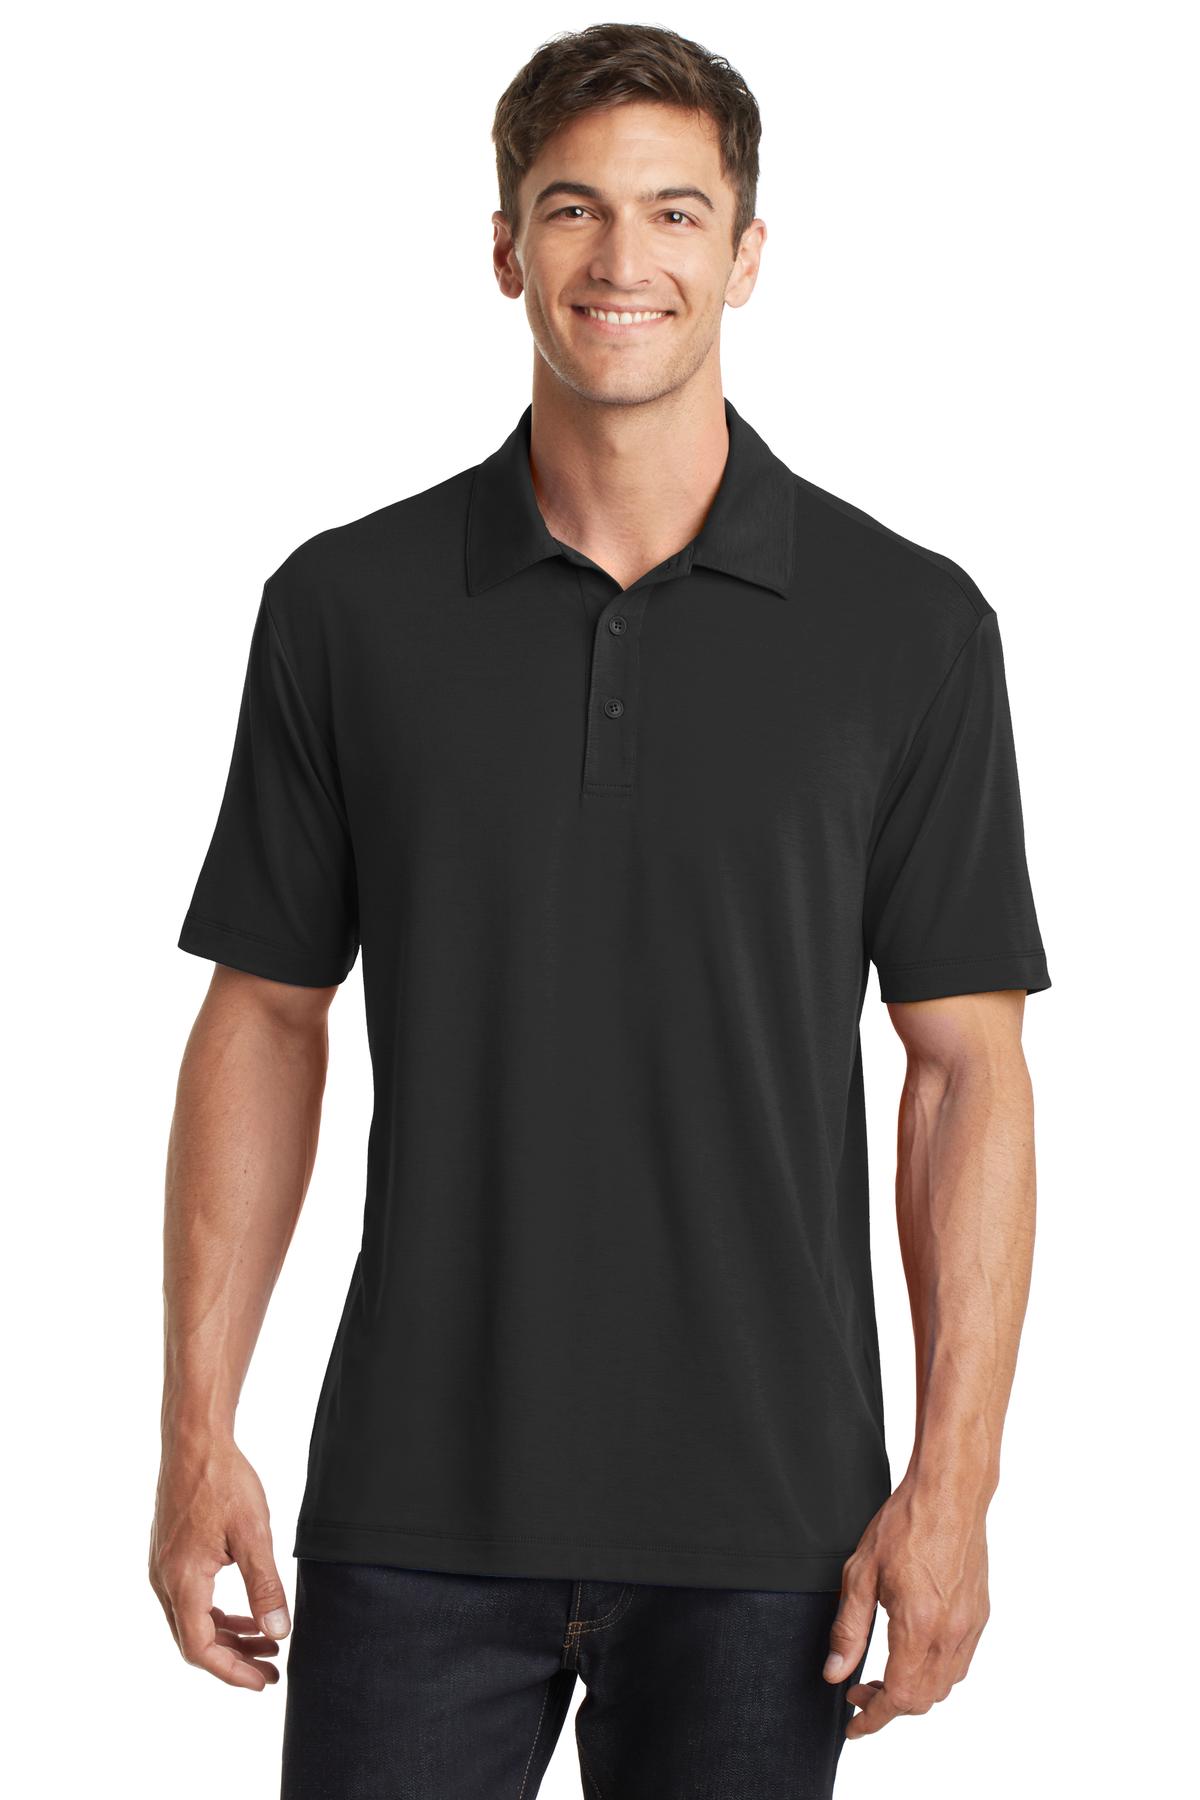 Port Authority Hospitality Polos & Knits ® Cotton Touch Performance Polo.-Port Authority